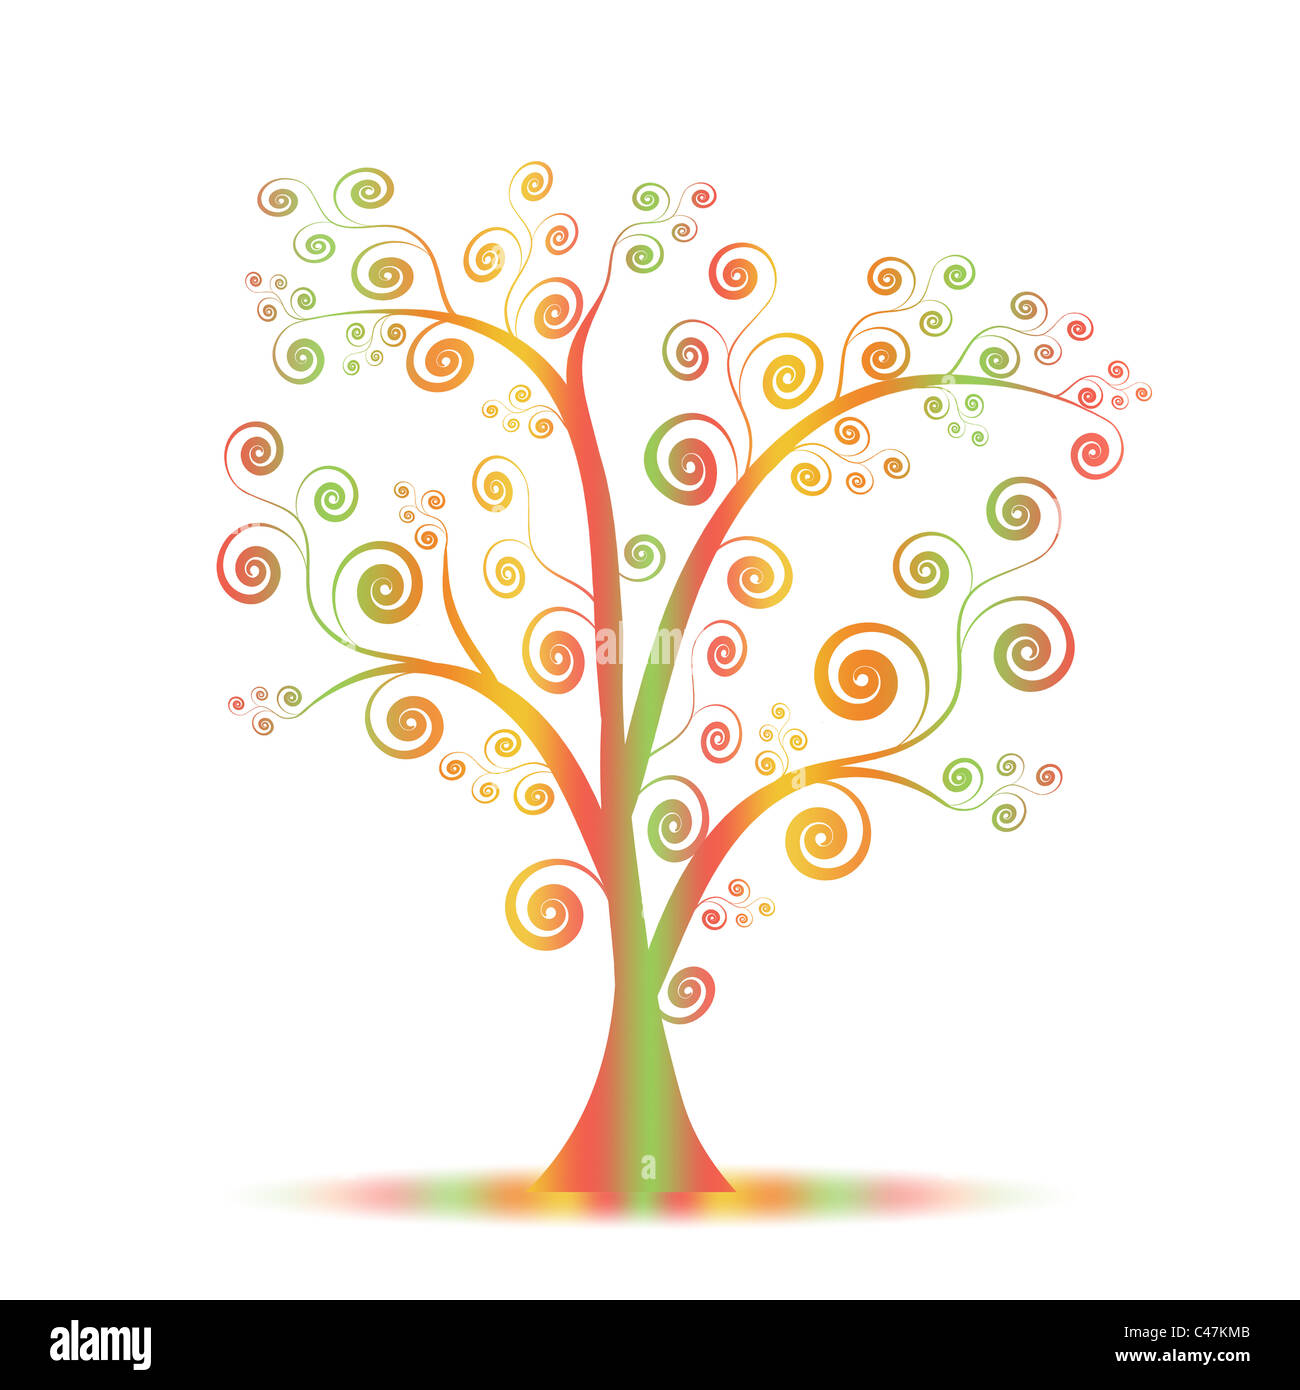 Colorful abstract art tree on white background Stock Photo